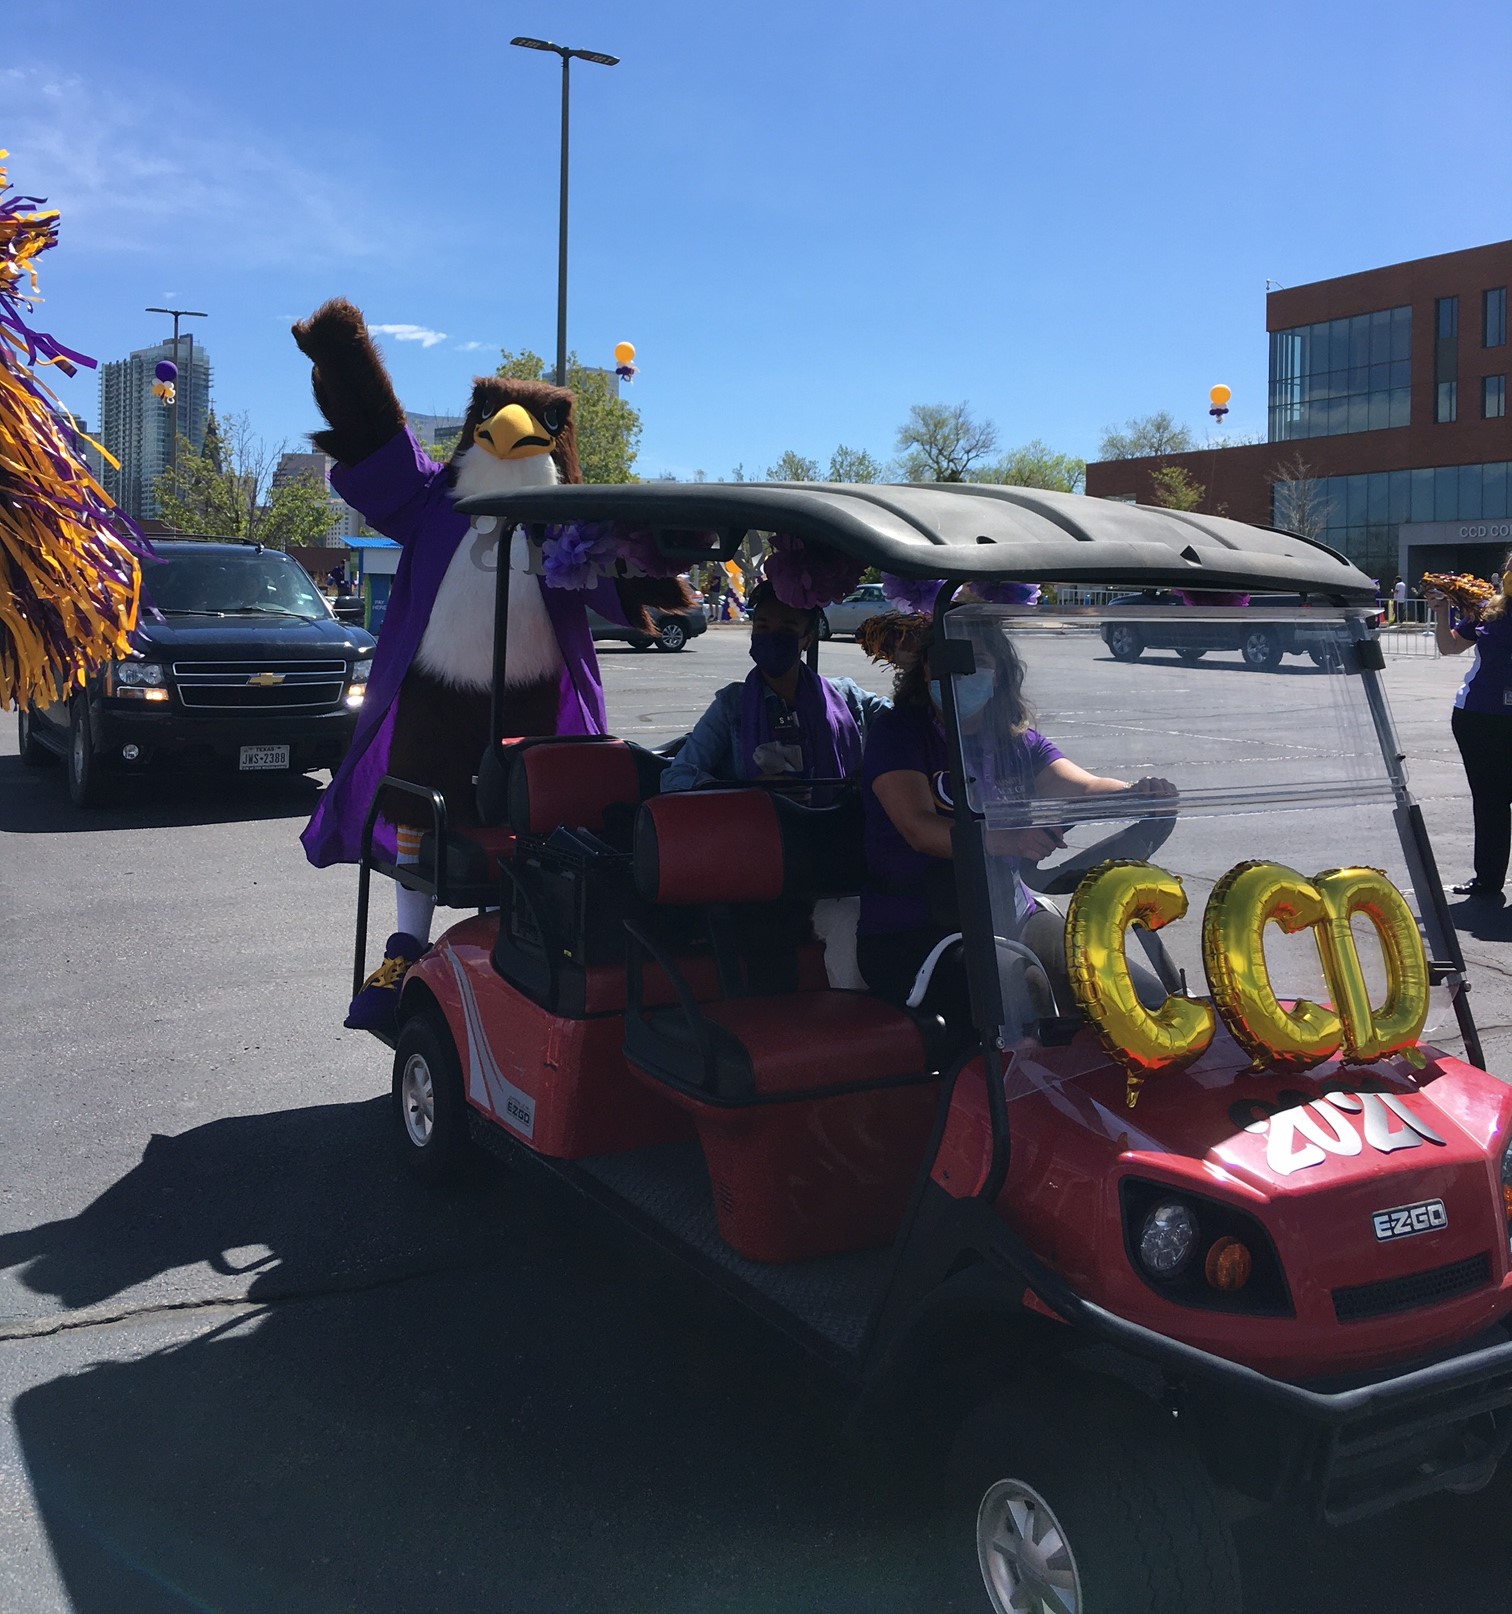 CCD mascot, Swoop, riding on a decorated golf cart at graduation